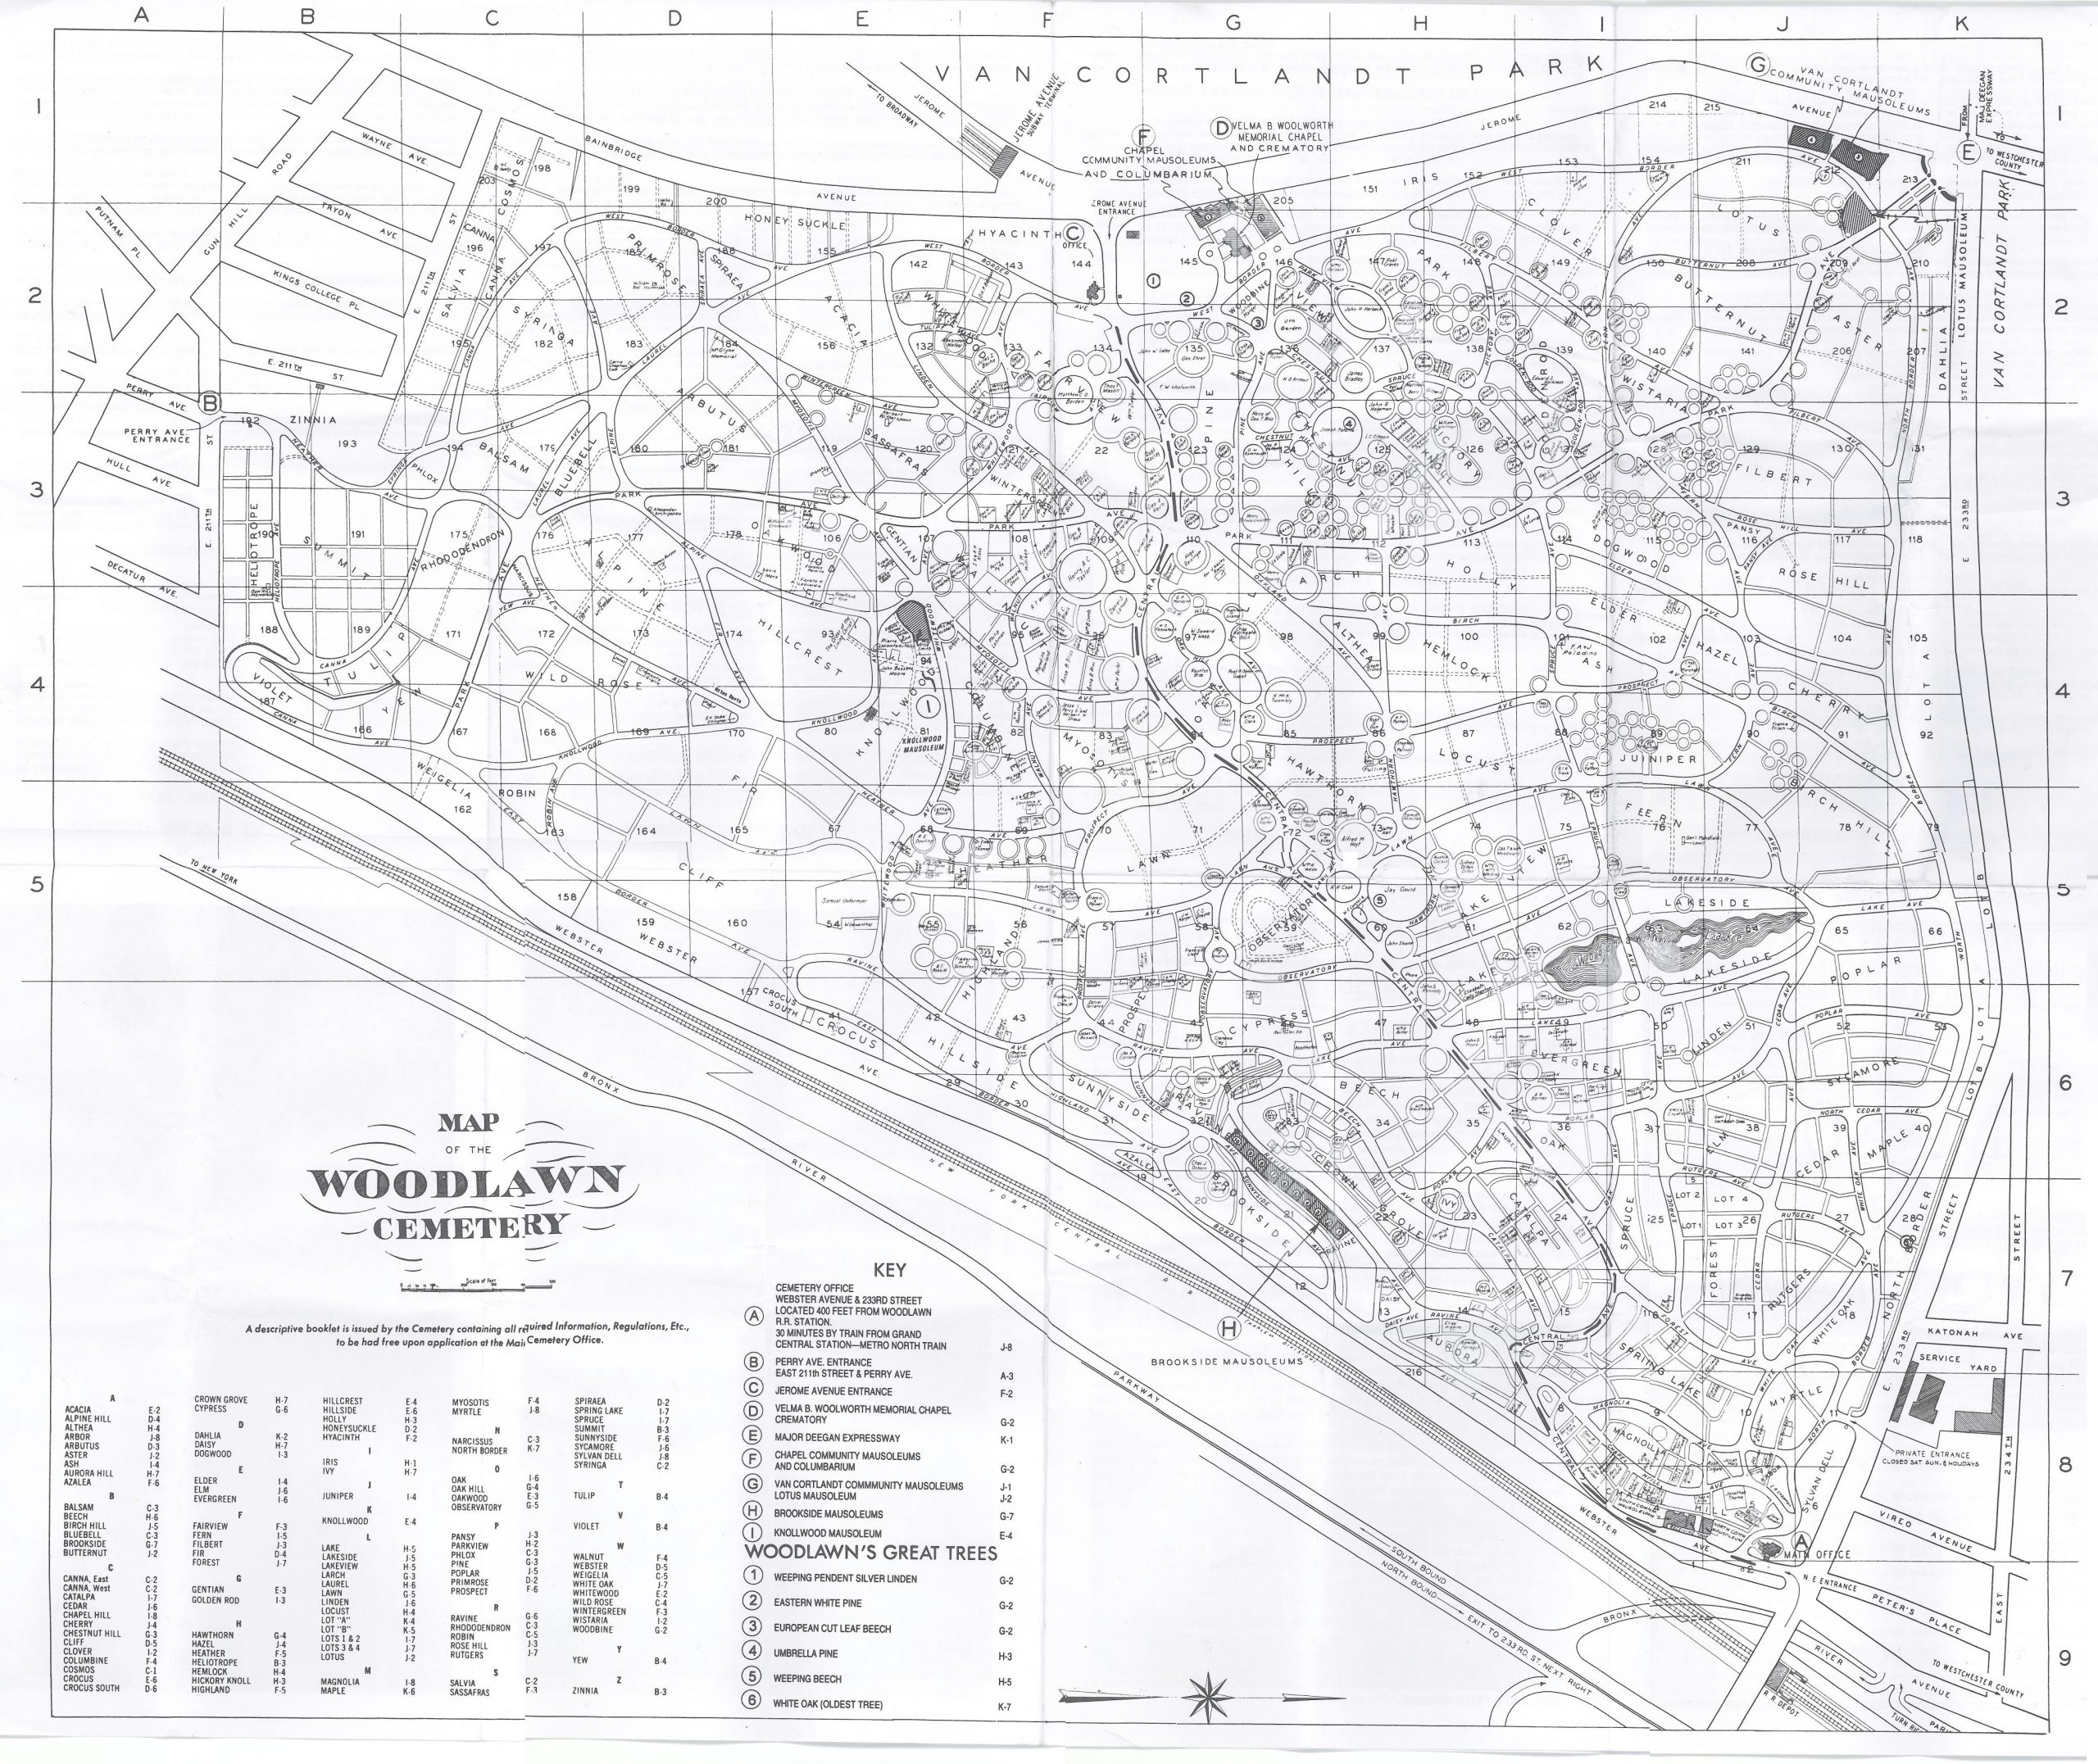 Map of Woodlawn Cemetery in The Bronx, New York